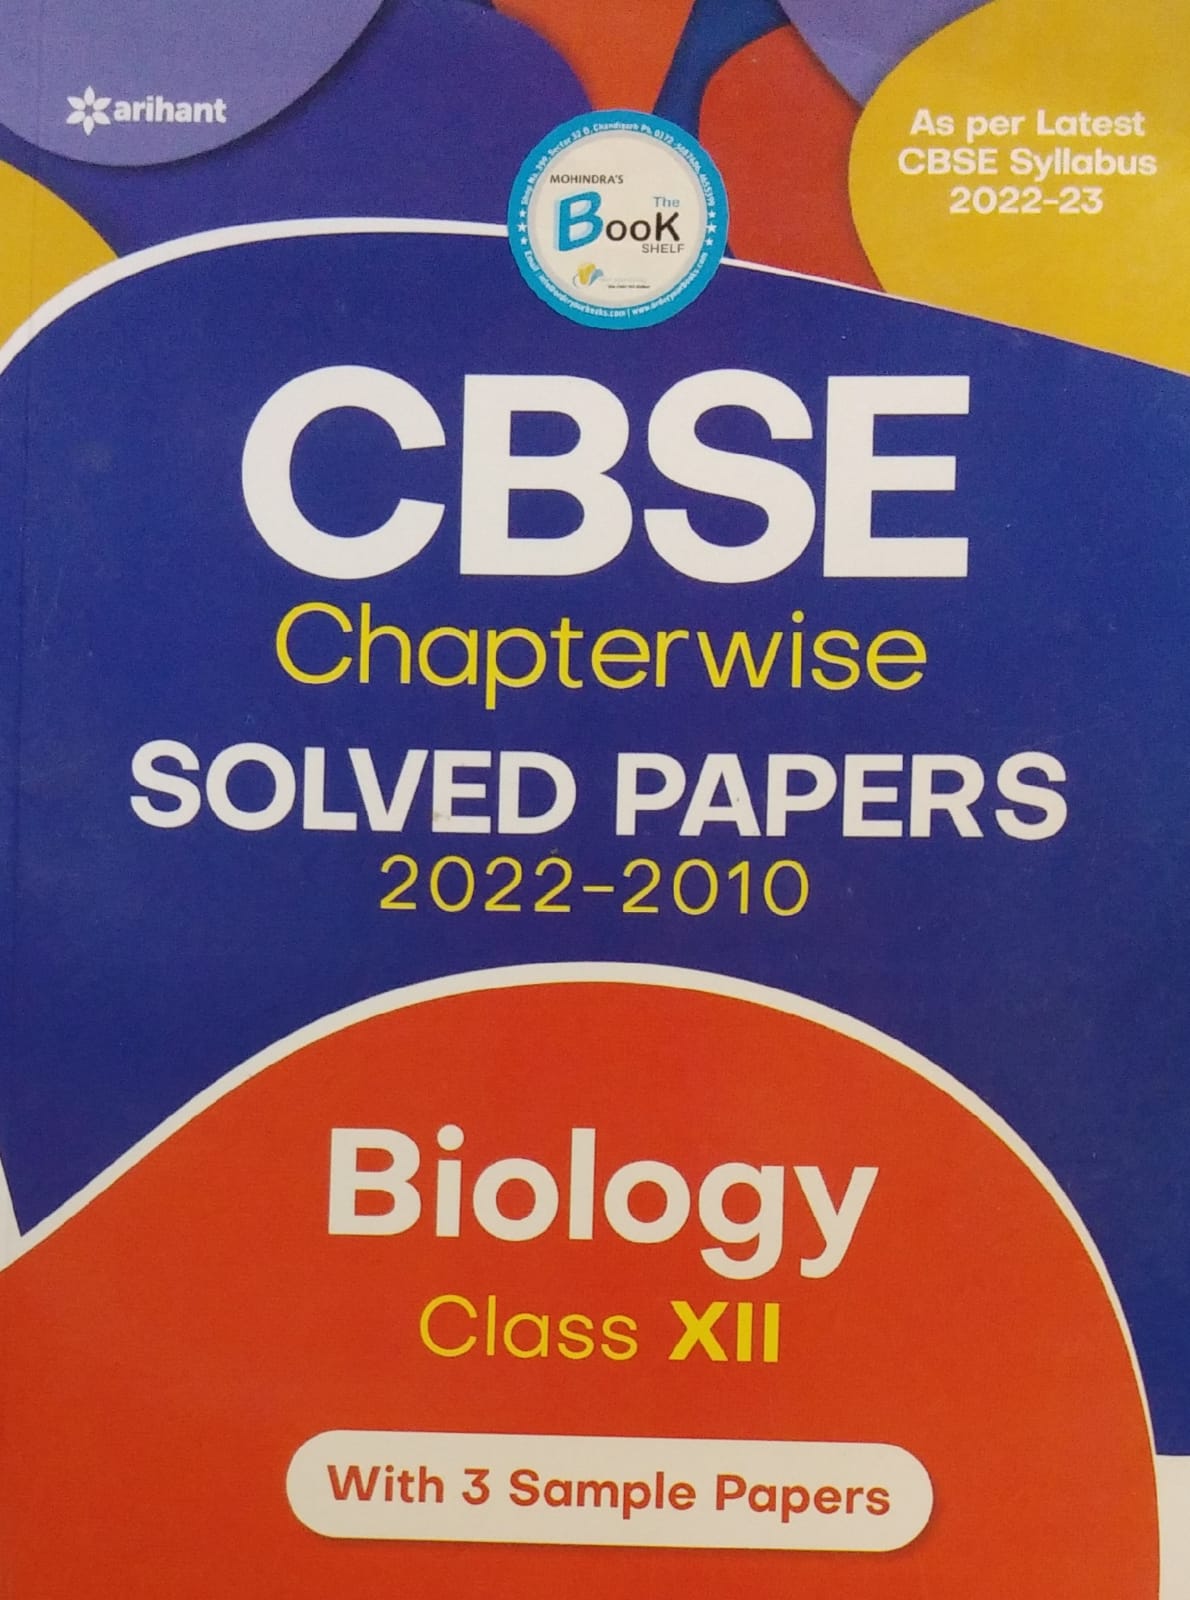 Biology 12th Class Chapterwise Solved Papers C.B.S.E Edition 2022